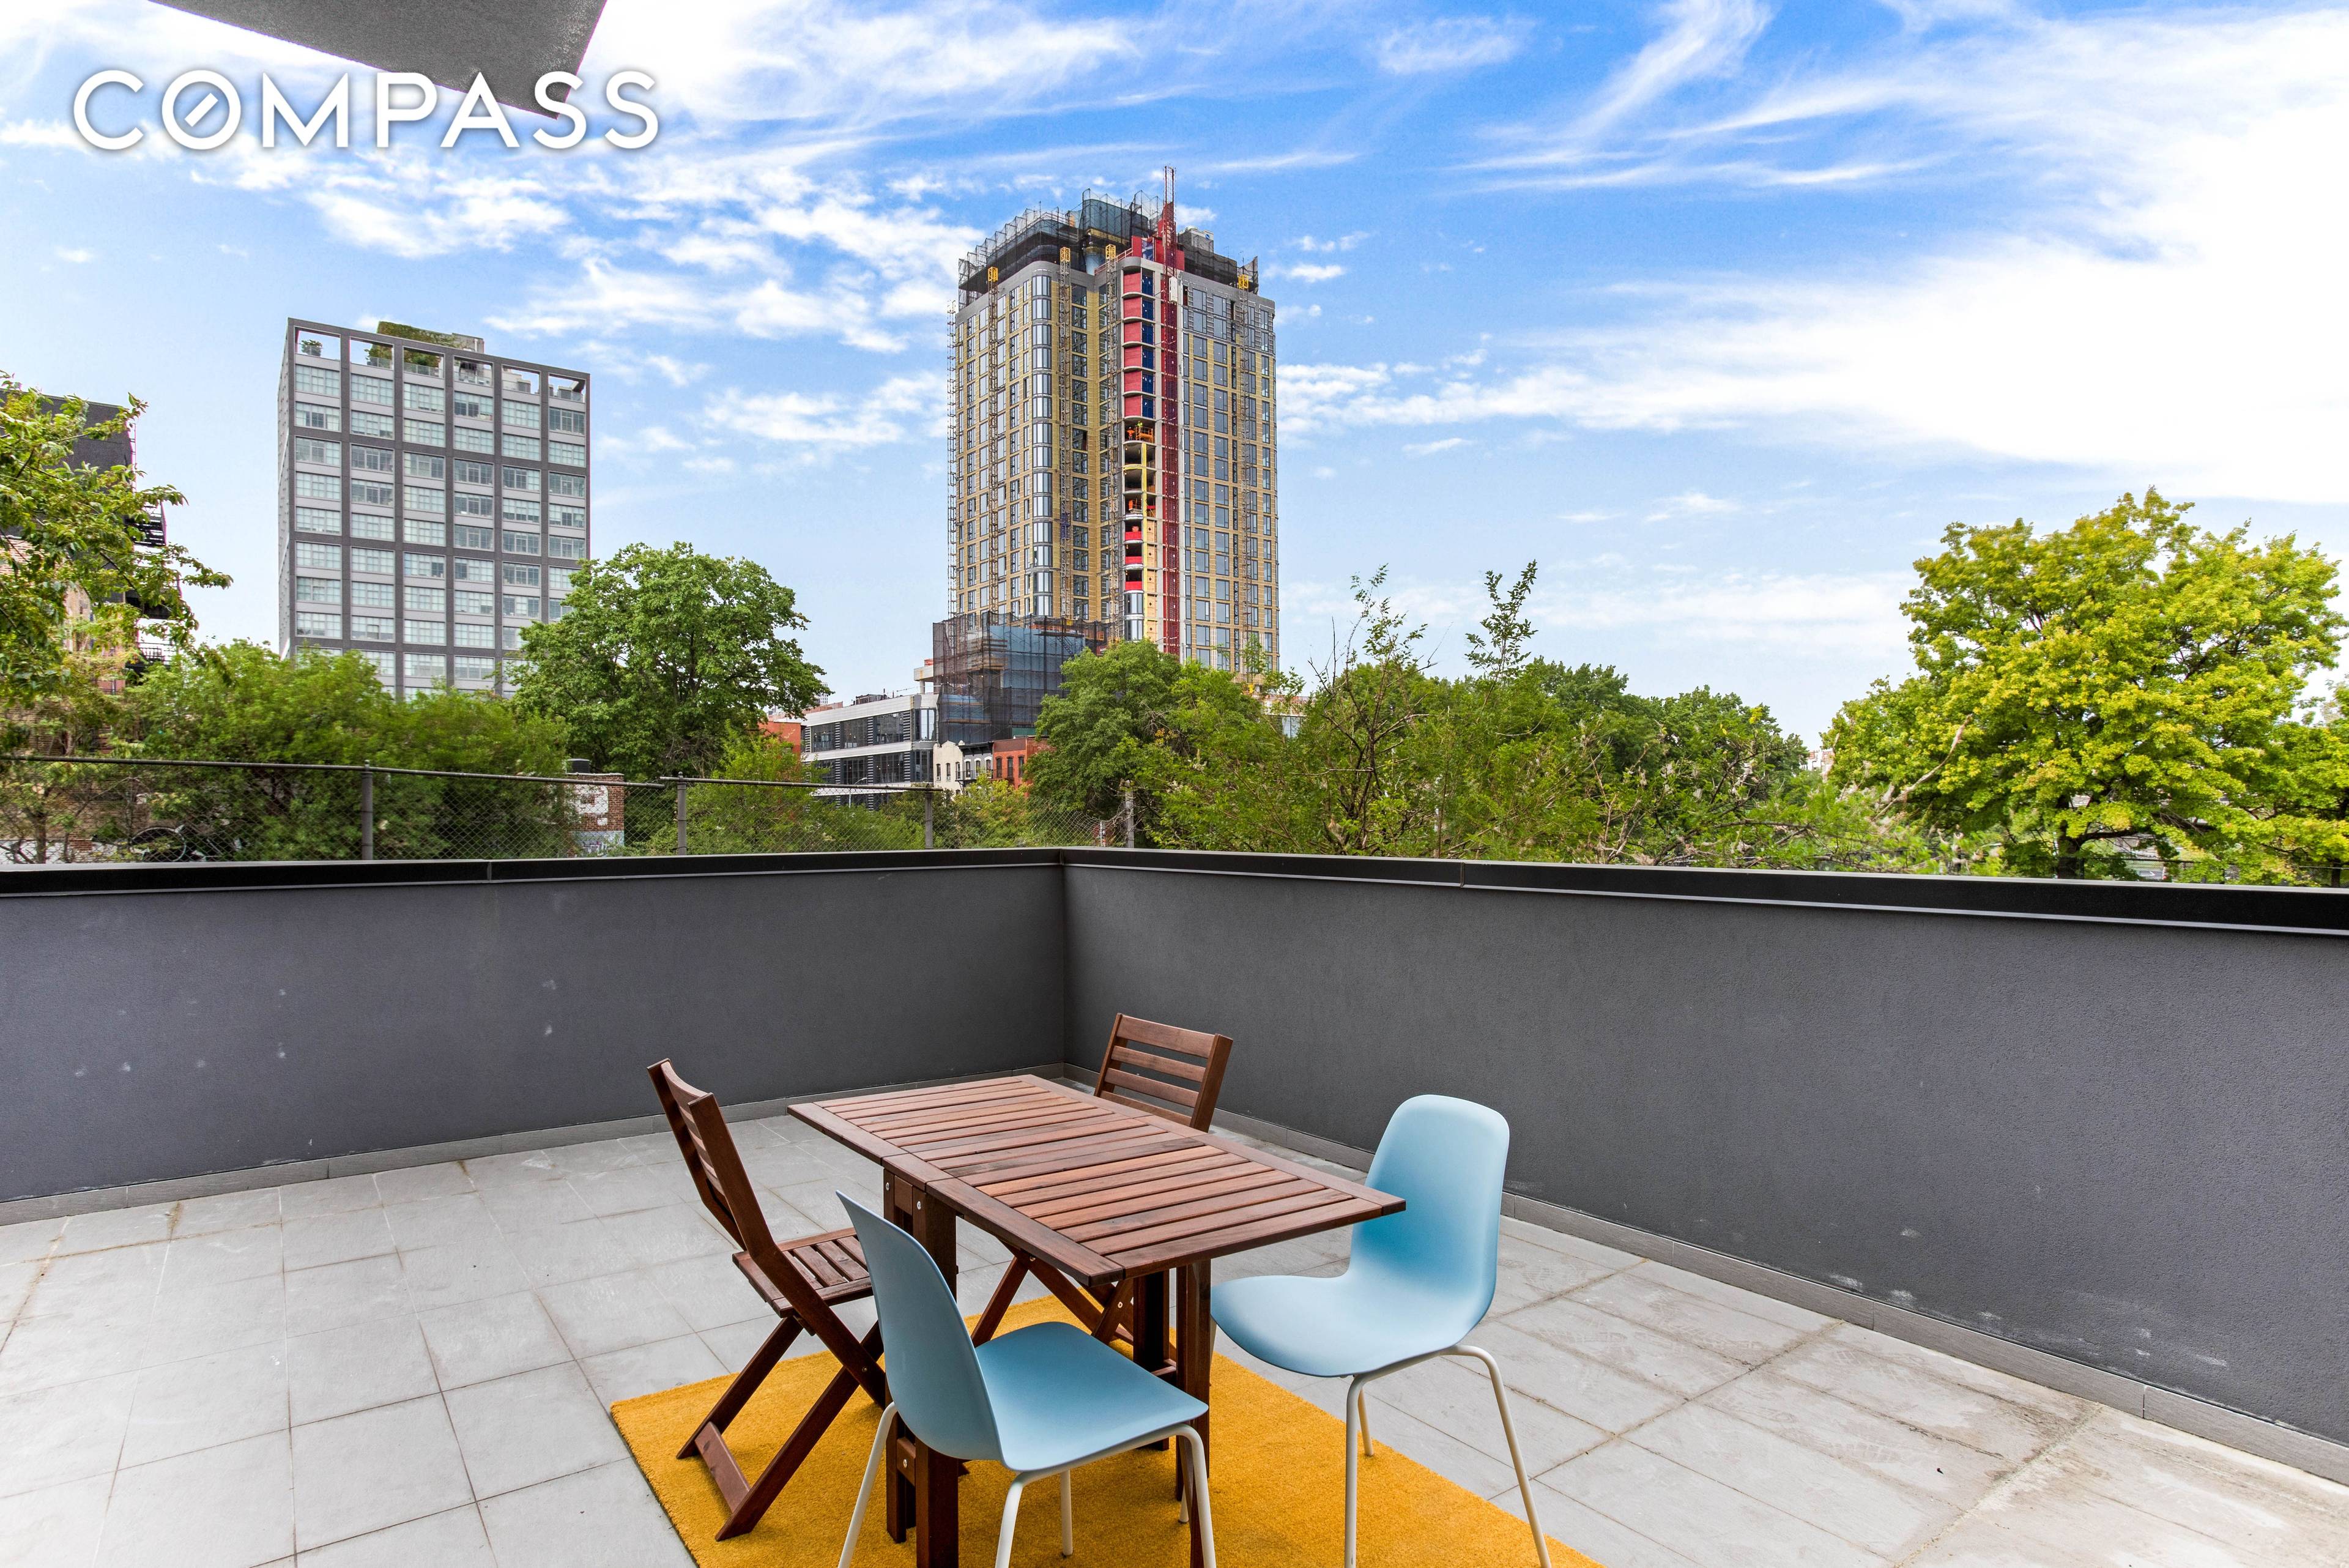 Williamsburg Elevator Building Gorgeous 2BD 1BA Home with Balcony, Central Air, Hardwood Flooring, Loft like Ceilings, Sound Proof Windows, Chef s Kitchen with Integrated Appliances, Video Intercom and Roof Access ...